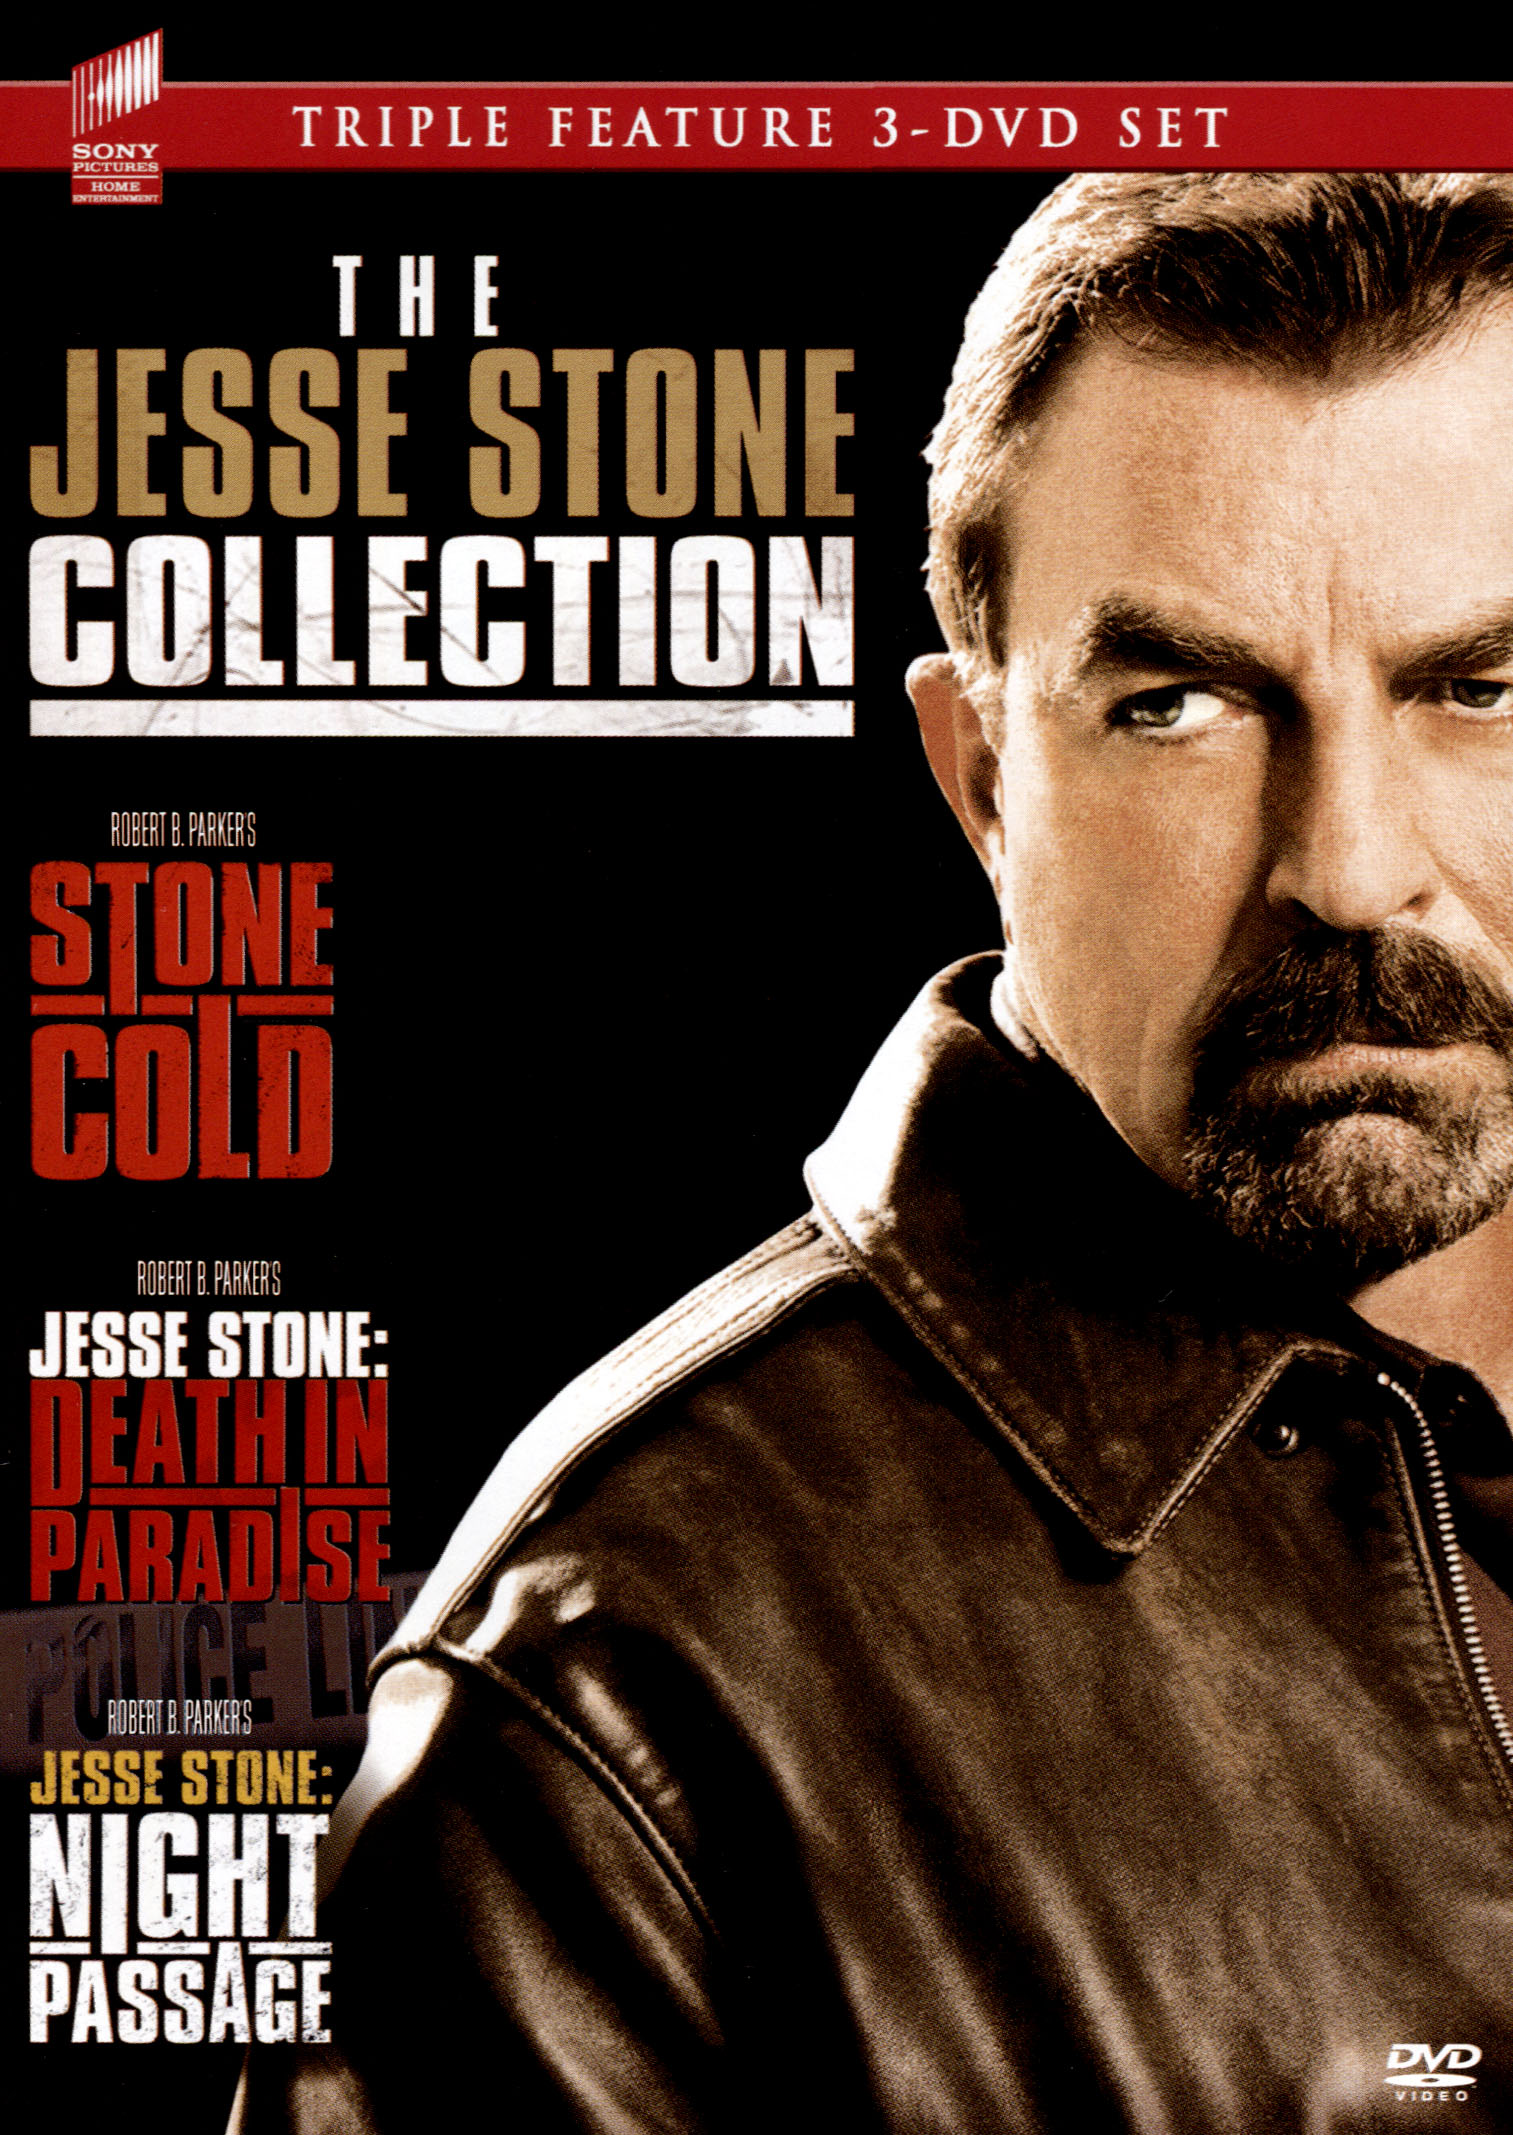 the-jesse-stone-collection-stone-cold-jesse-stone-death-in-paradise